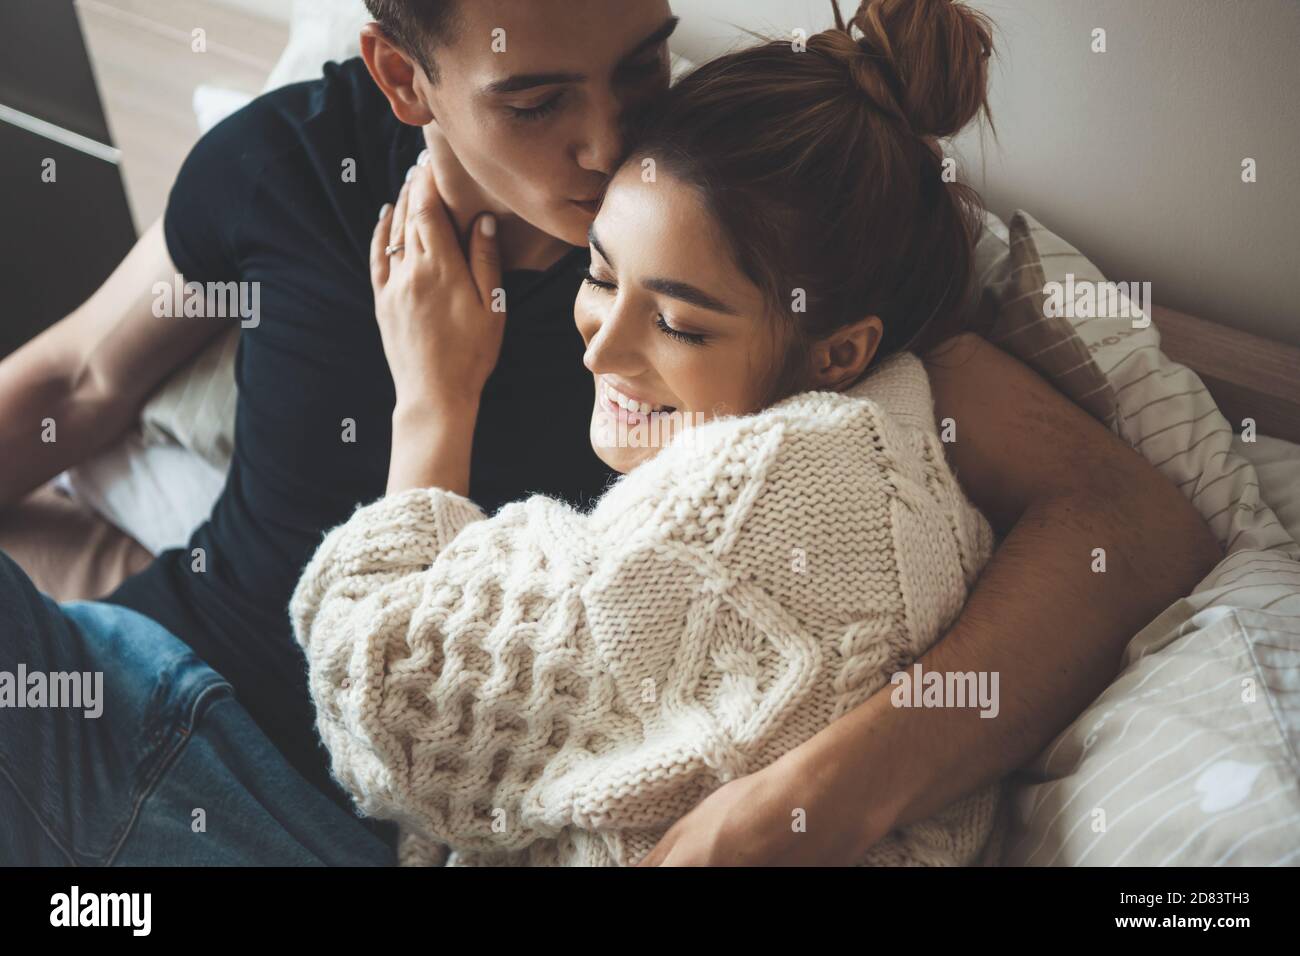 Caucasian man kissing his cute wife dressed in a white knitted sweater embracing in bed Stock Photo